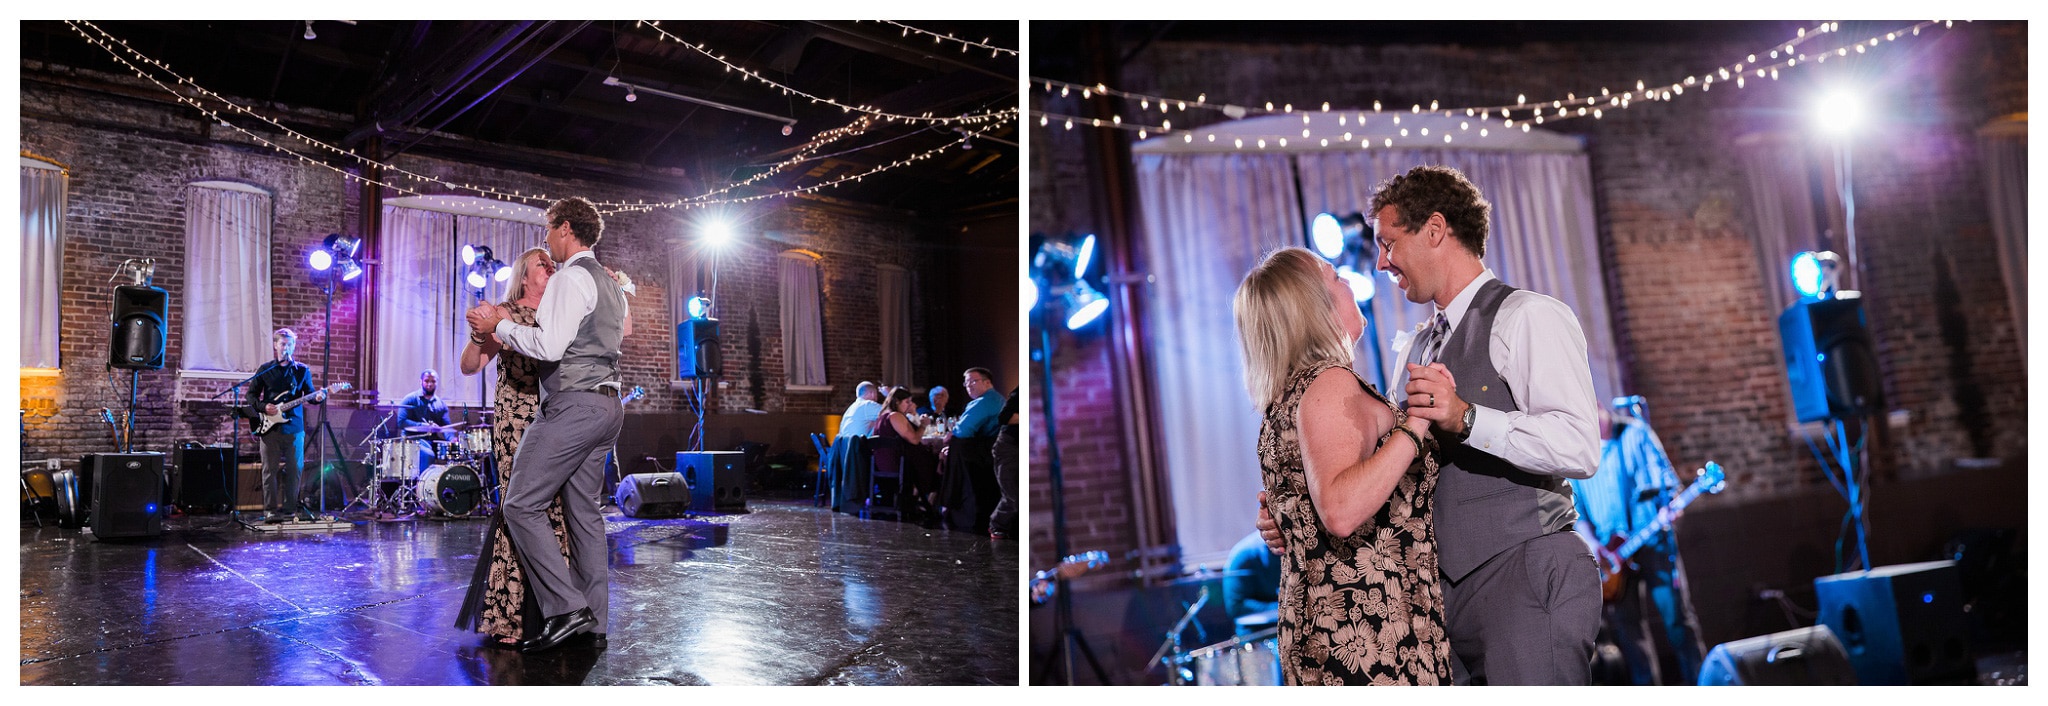 Mother and Son dance together - Venue and Catering – King plow Event Gallery and Bold American Events Decor and flowers – Stylish Stems Music and Band – Seven Sharp Nine Transportation – Georgia Trolley Photographer One Life Photography